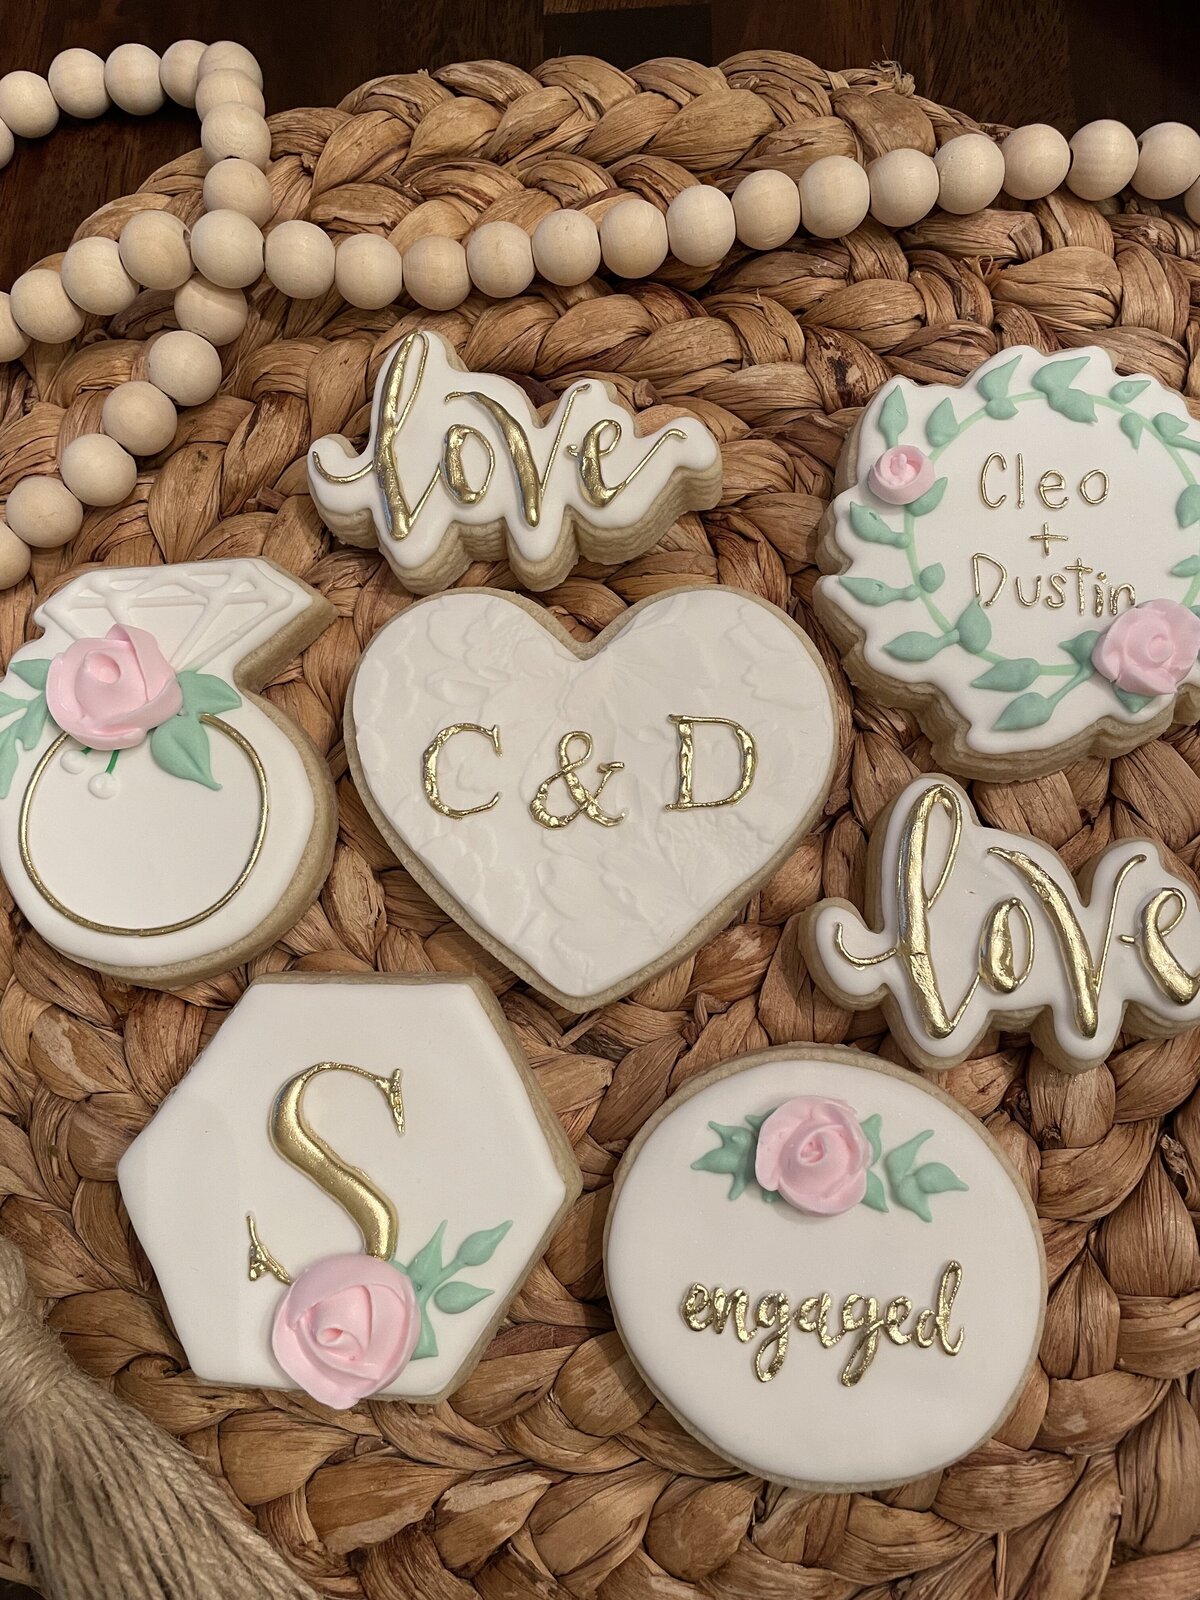 Elegant cookies that elevate special moments hand decorated in Gilbert, AZ.